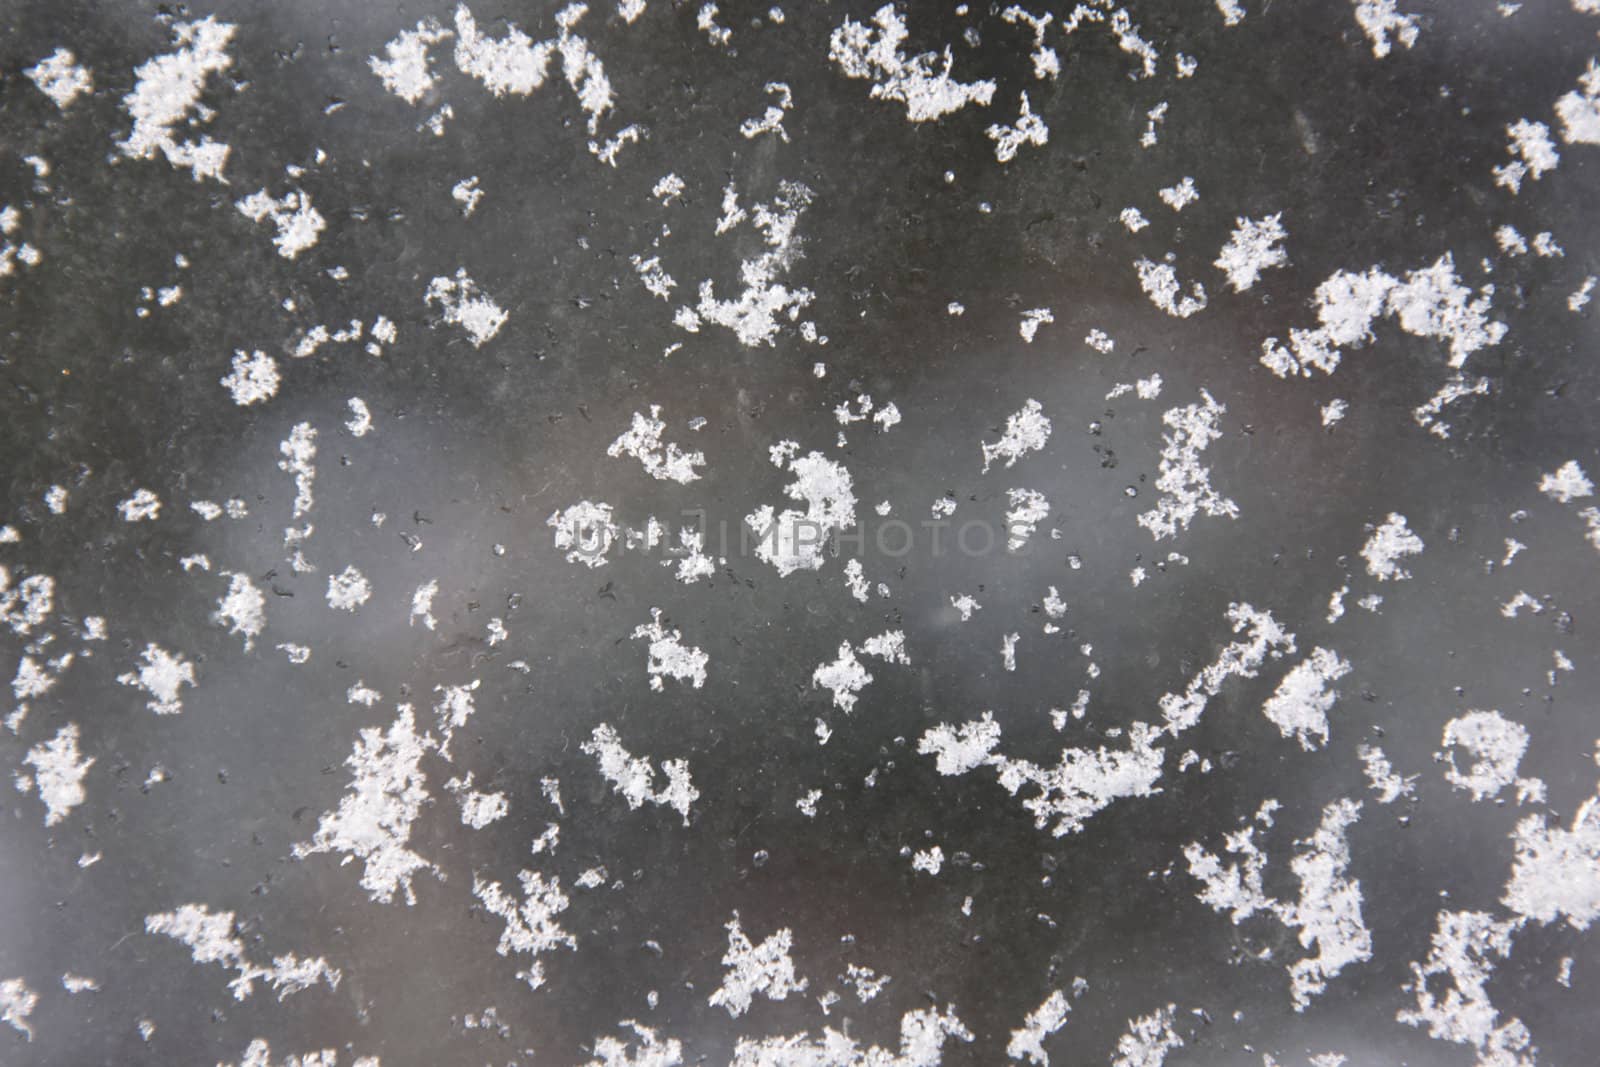 Snow Flakes on a Window
 by ca2hill